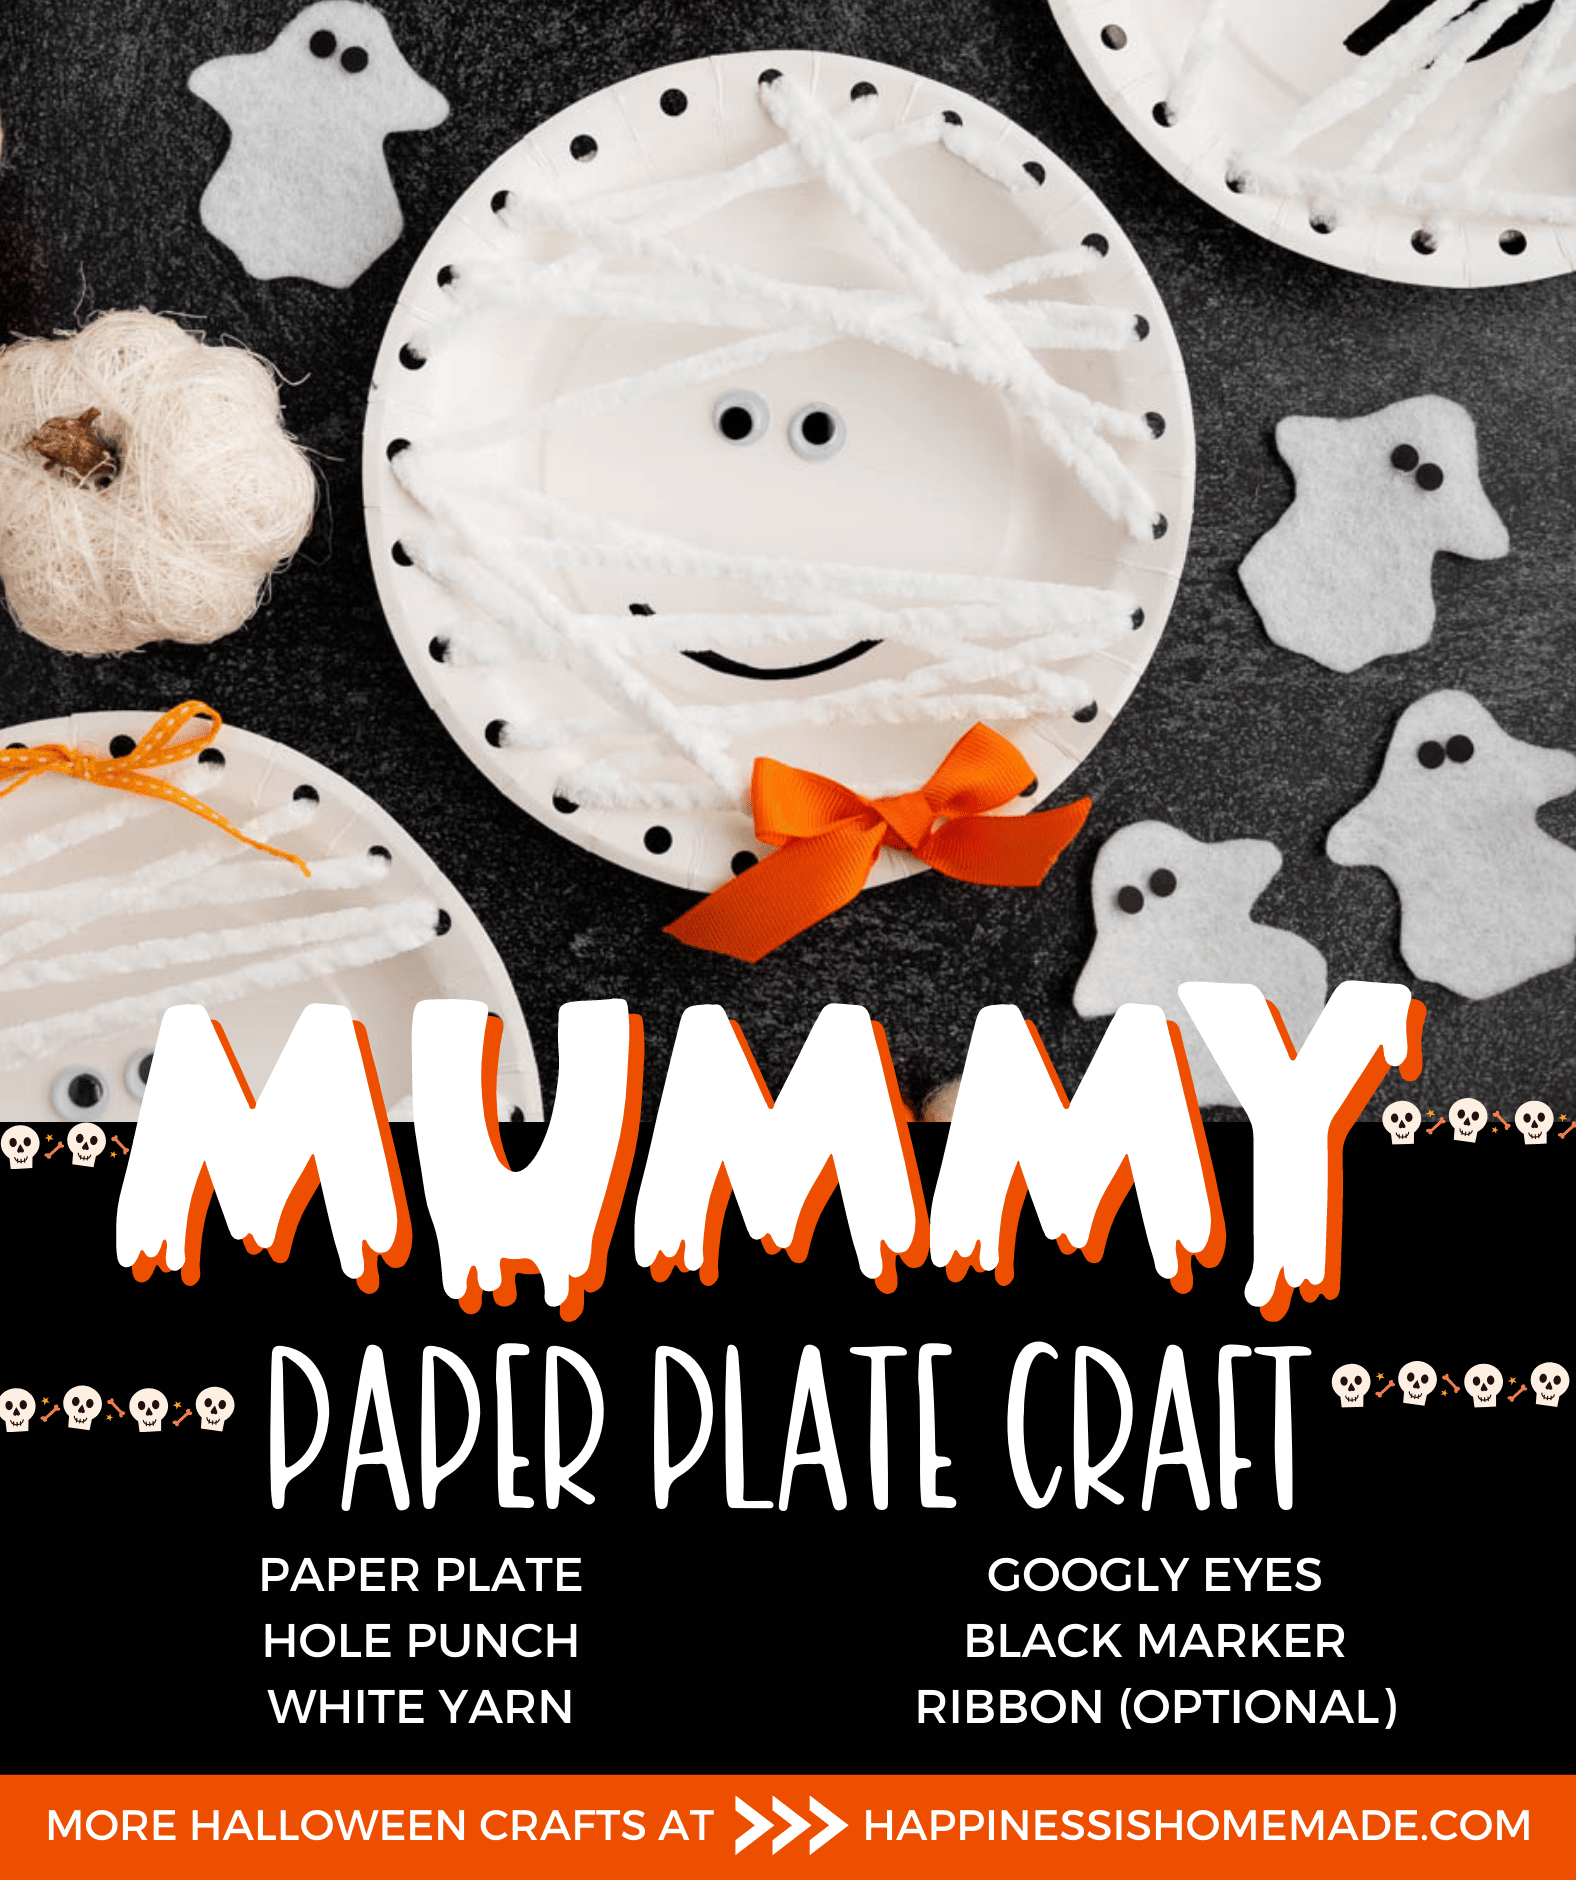 mummy paper plate craft list of supplies needed: paper plate, hole punch, white yarn, googly eyes, black marker, ribbon (optional)